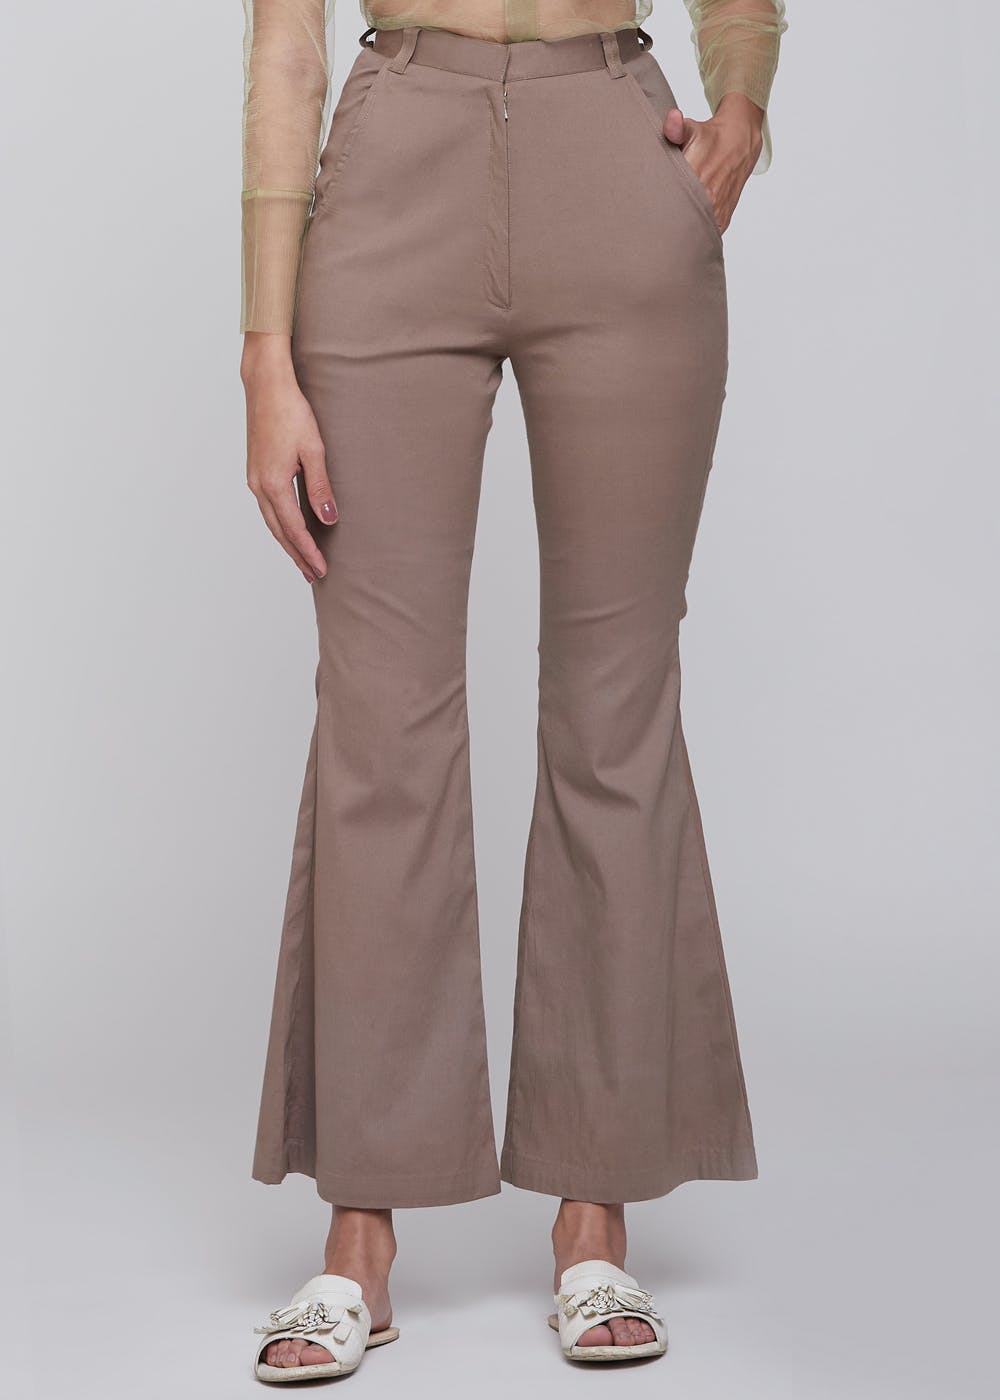 MIXT by Nykaa Fashion White Flared High Waist Pants Buy MIXT by Nykaa  Fashion White Flared High Waist Pants Online at Best Price in India  Nykaa